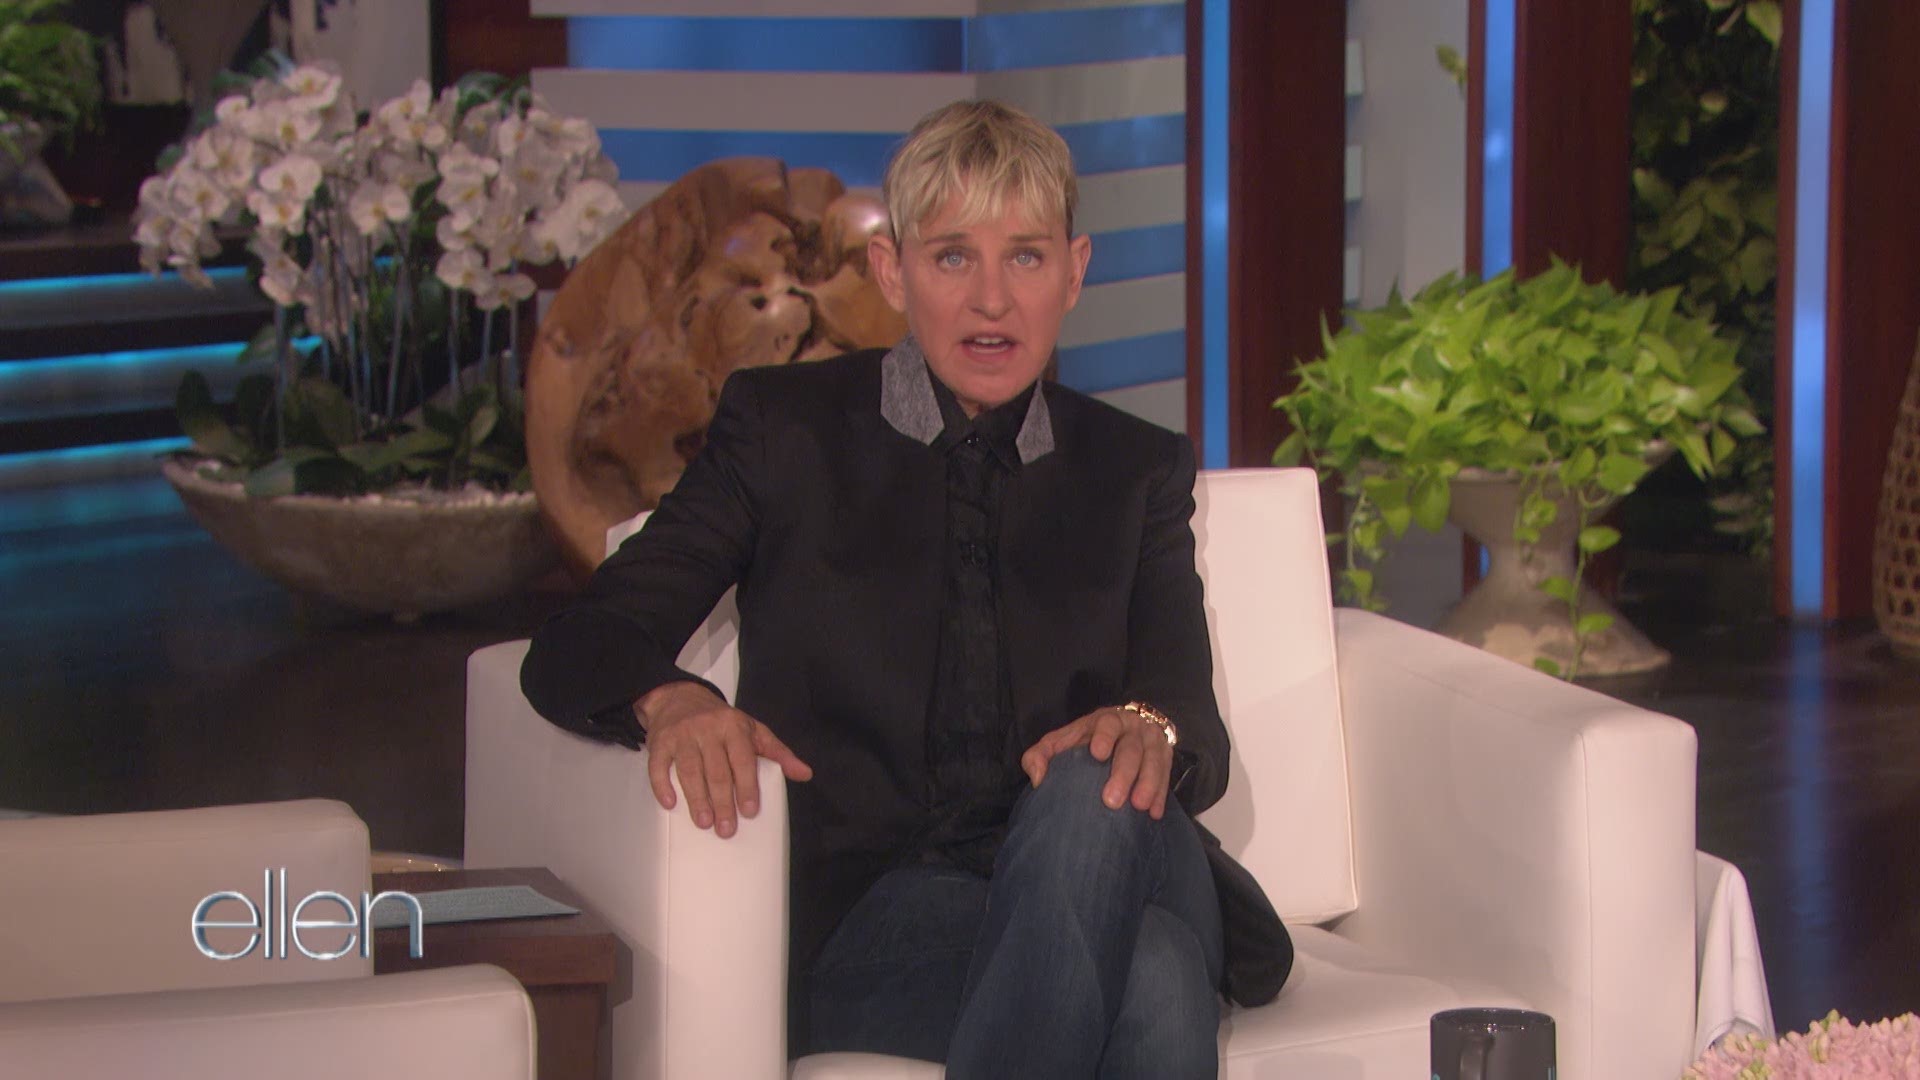 Hunter Woodhall, a junior at the University of Arkansas-Fayetteville, made an appearance on the Ellen Show after an uplifting TikTok video went viral.